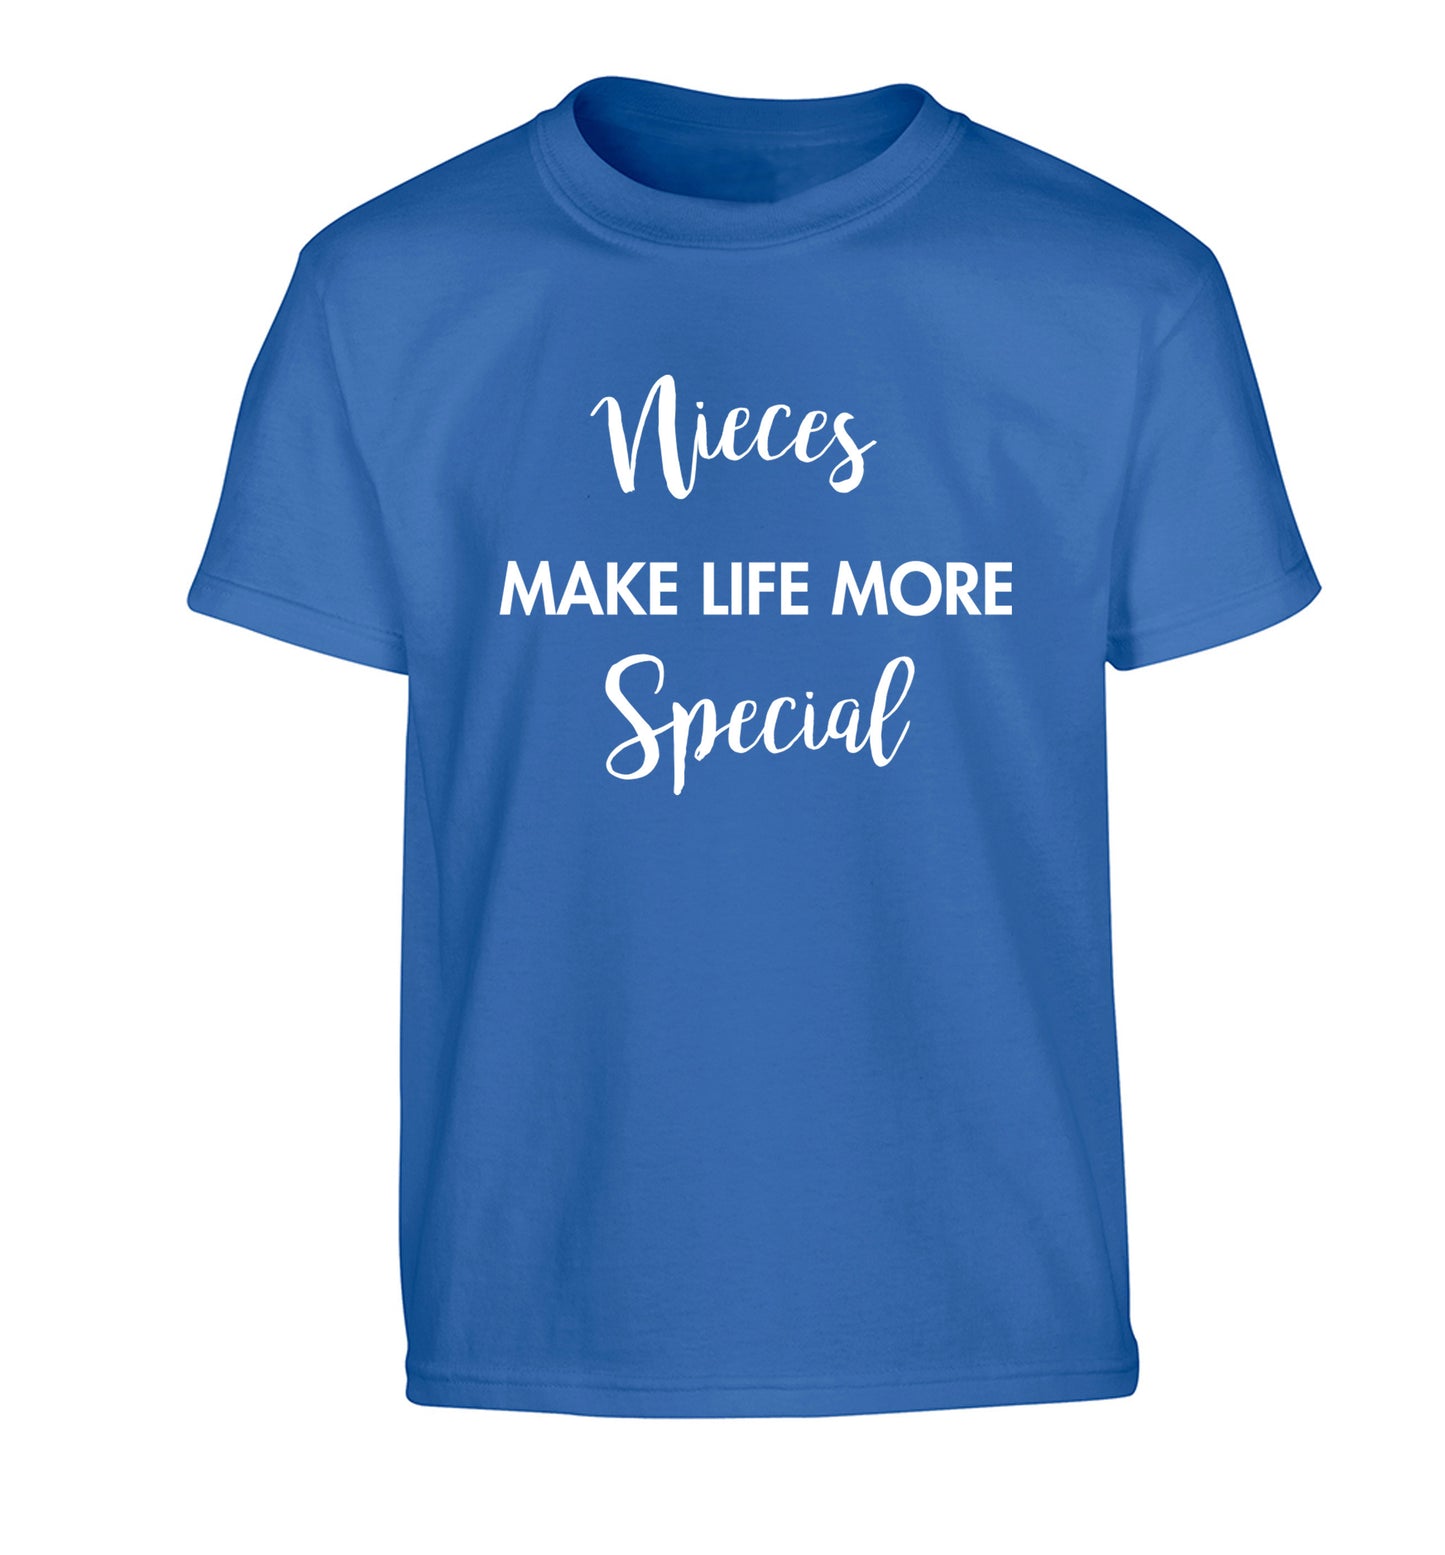 Nieces make life more special Children's blue Tshirt 12-14 Years